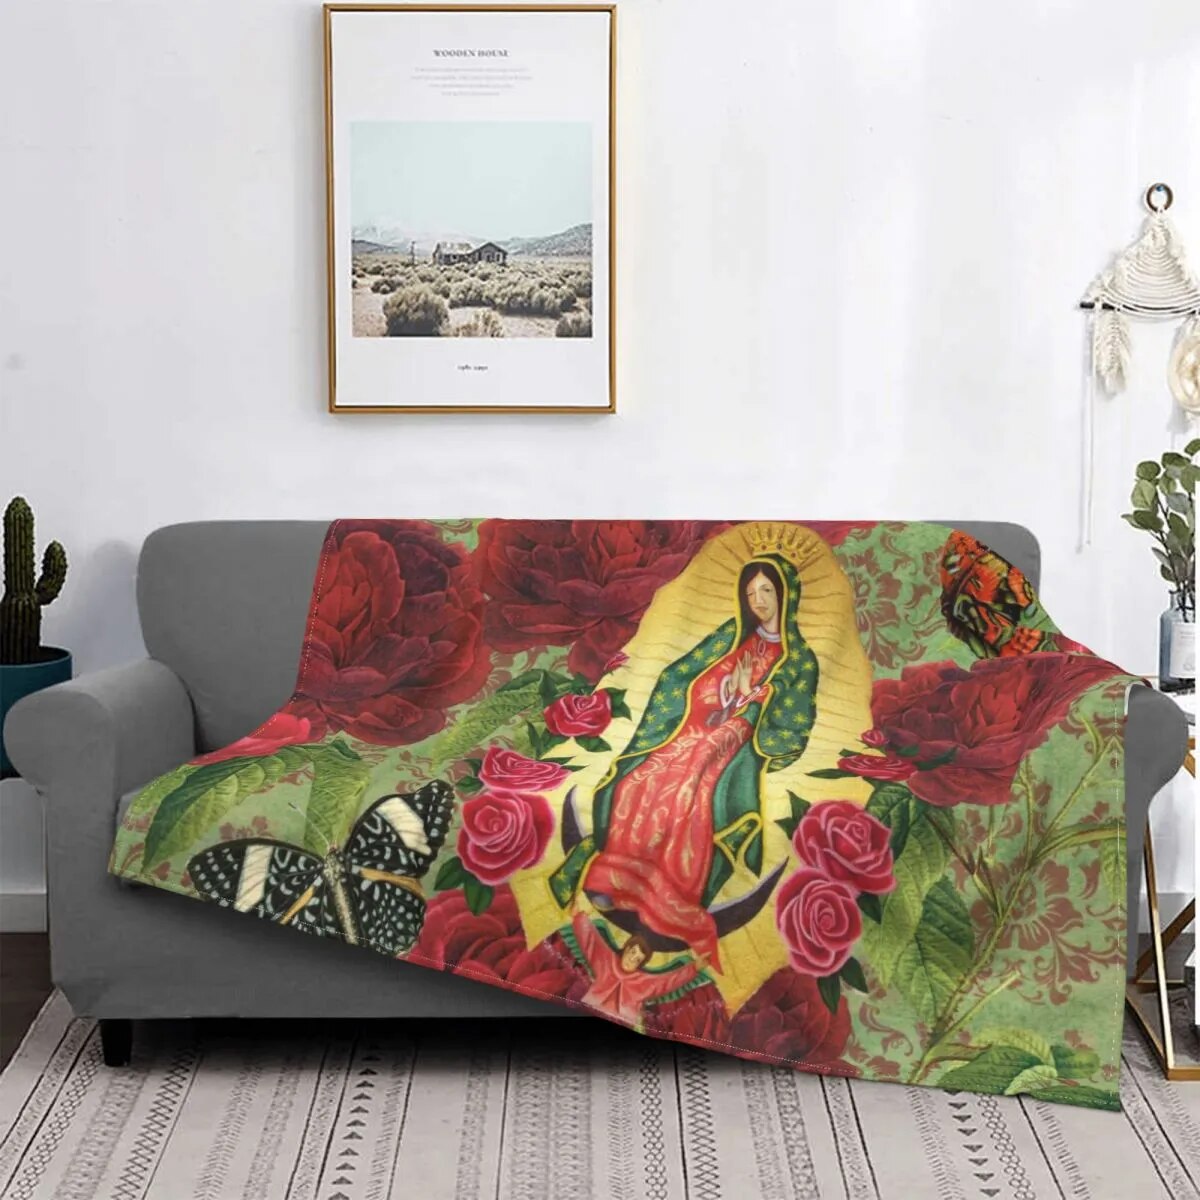 Flower: Dress up that couch!